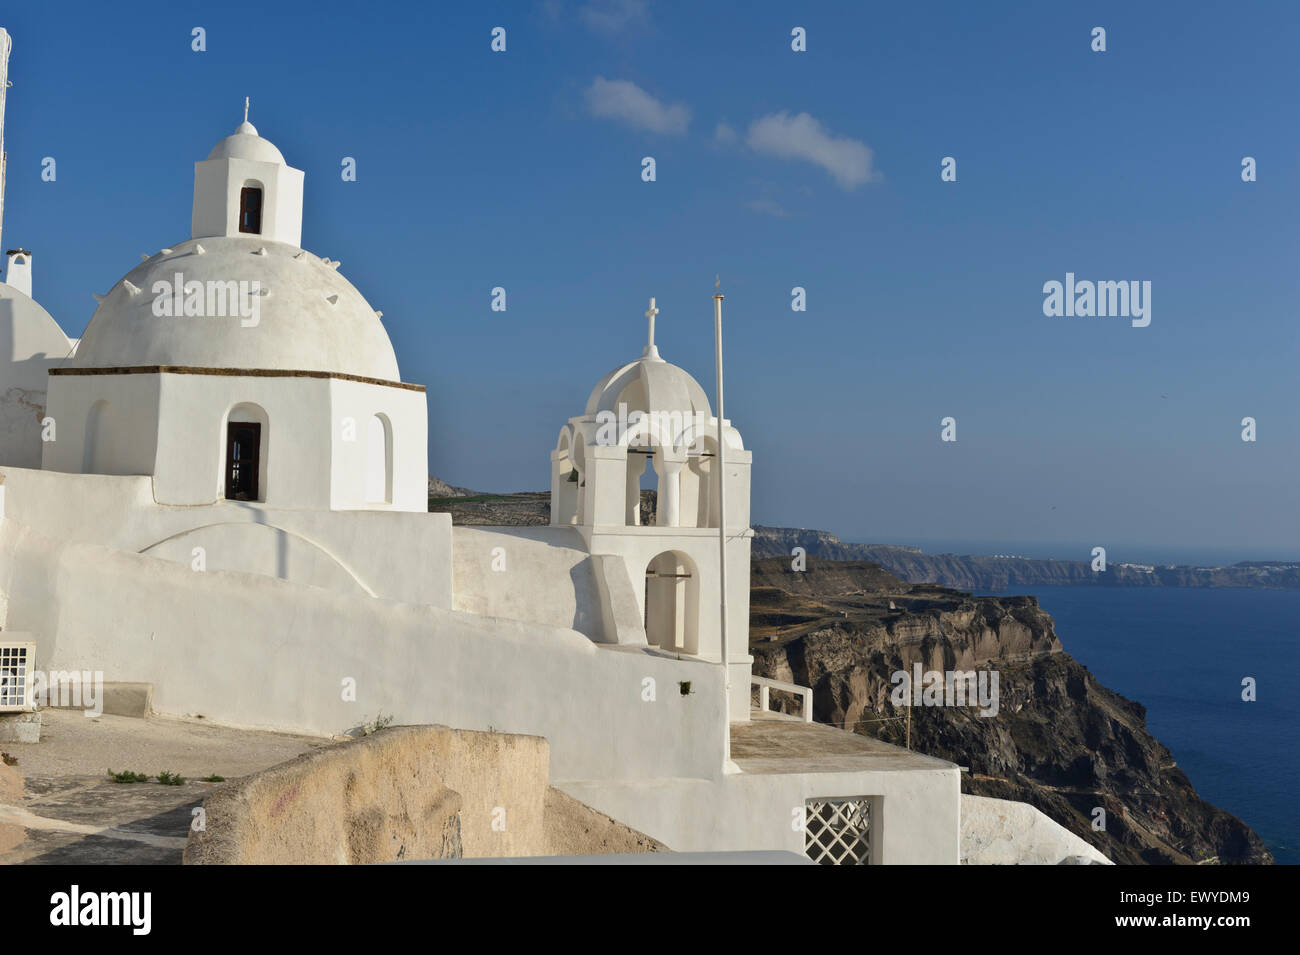 An Orthodox church with white dome and bell tower on the Caldera, Fira, Santorini, Greece. Stock Photo